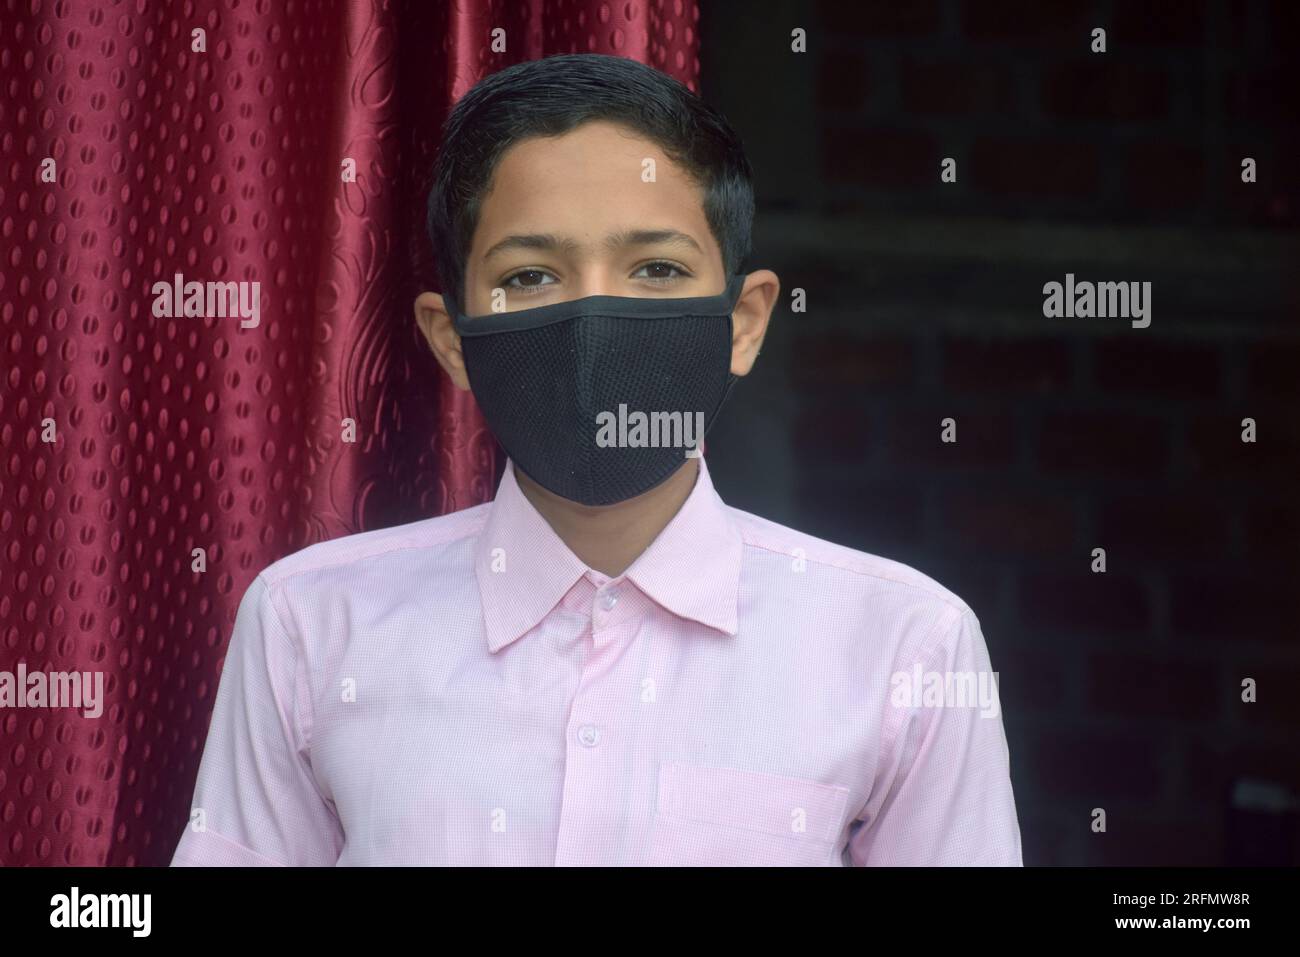 teen student boy wearing school uniform and face mask going to school in corona virus pandemic. Stock Photo